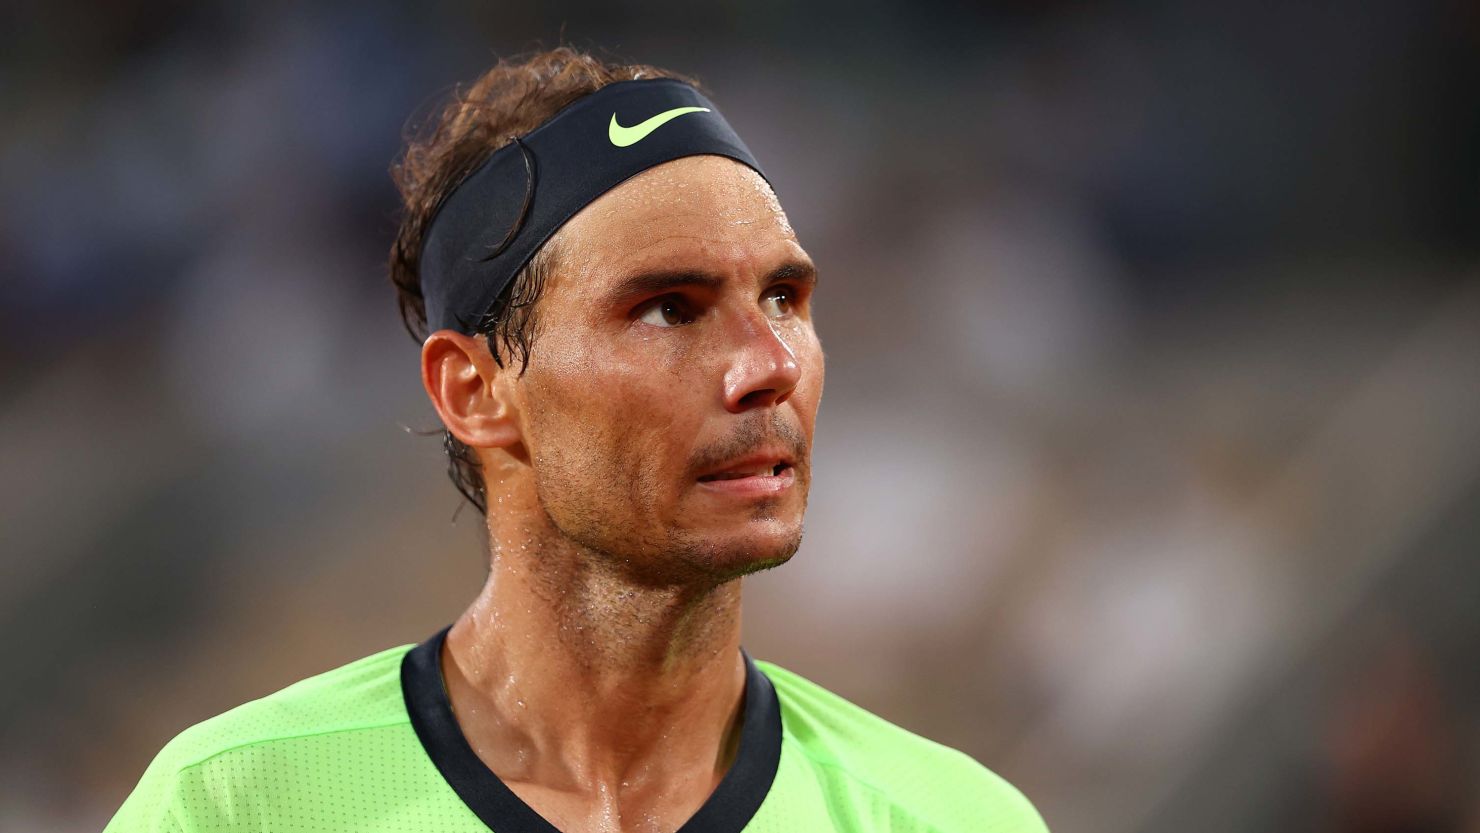 Rafael Nadal pulls out of US Open with foot injury, will miss remainder of  2021